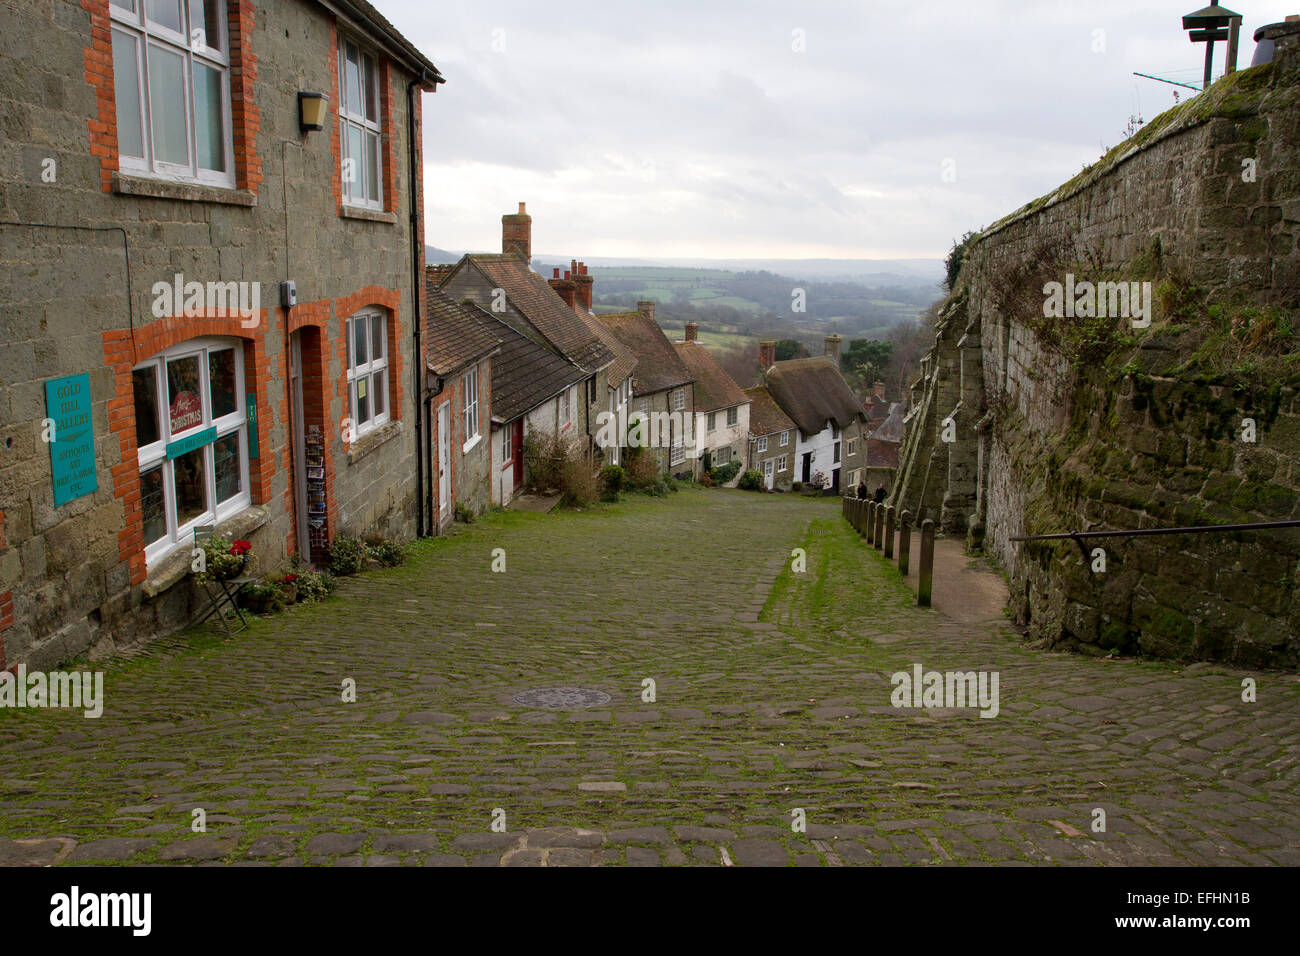 View at the top of Gold Hill, famous cobbled street in Shaftesbury, Dorset, England, looking downhill and to countryside beyond. Stock Photo